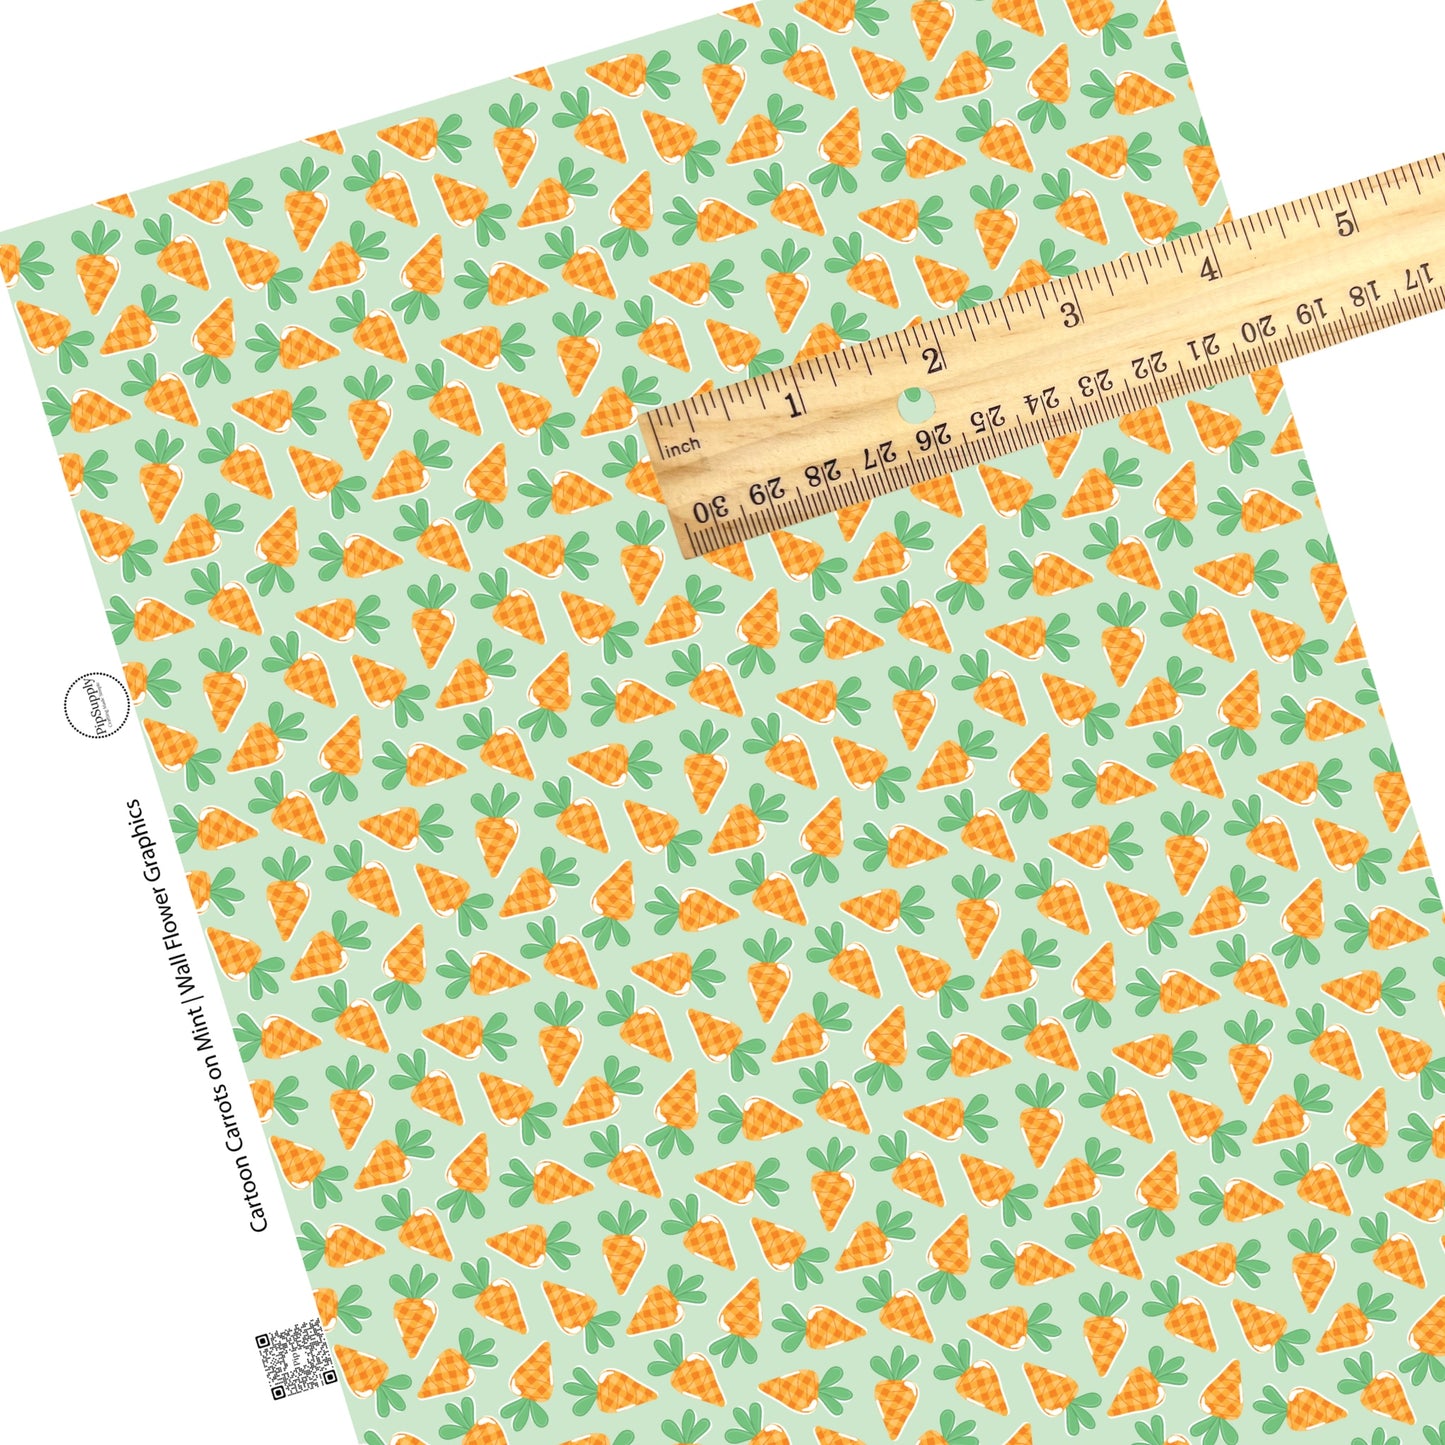 These spring pattern themed faux leather sheets contain the following design elements: cartoon carrots on light green. Our CPSIA compliant faux leather sheets or rolls can be used for all types of crafting projects.